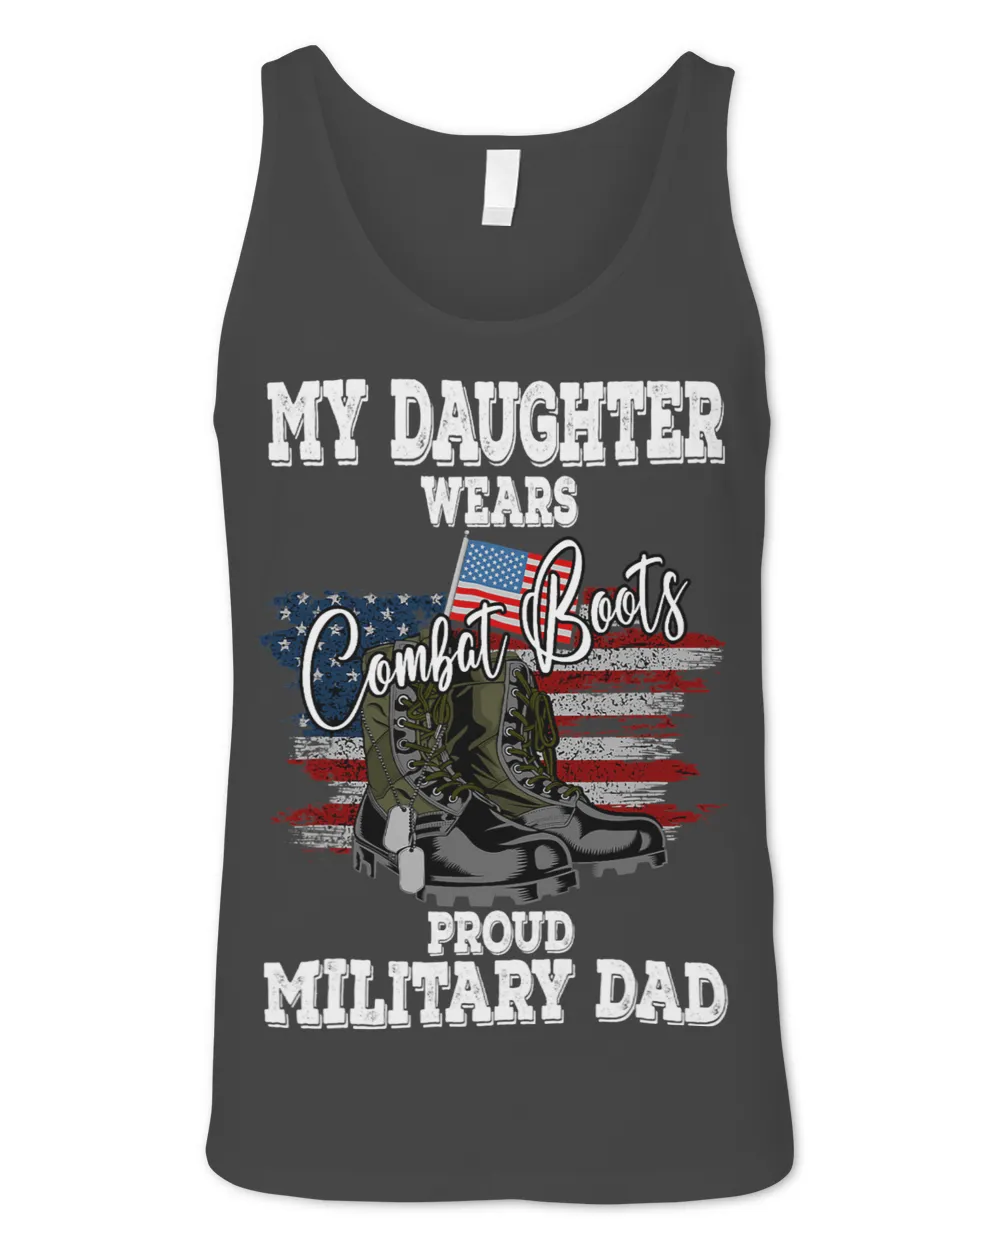 My daughter wears combat boots Military Dad Veterans day